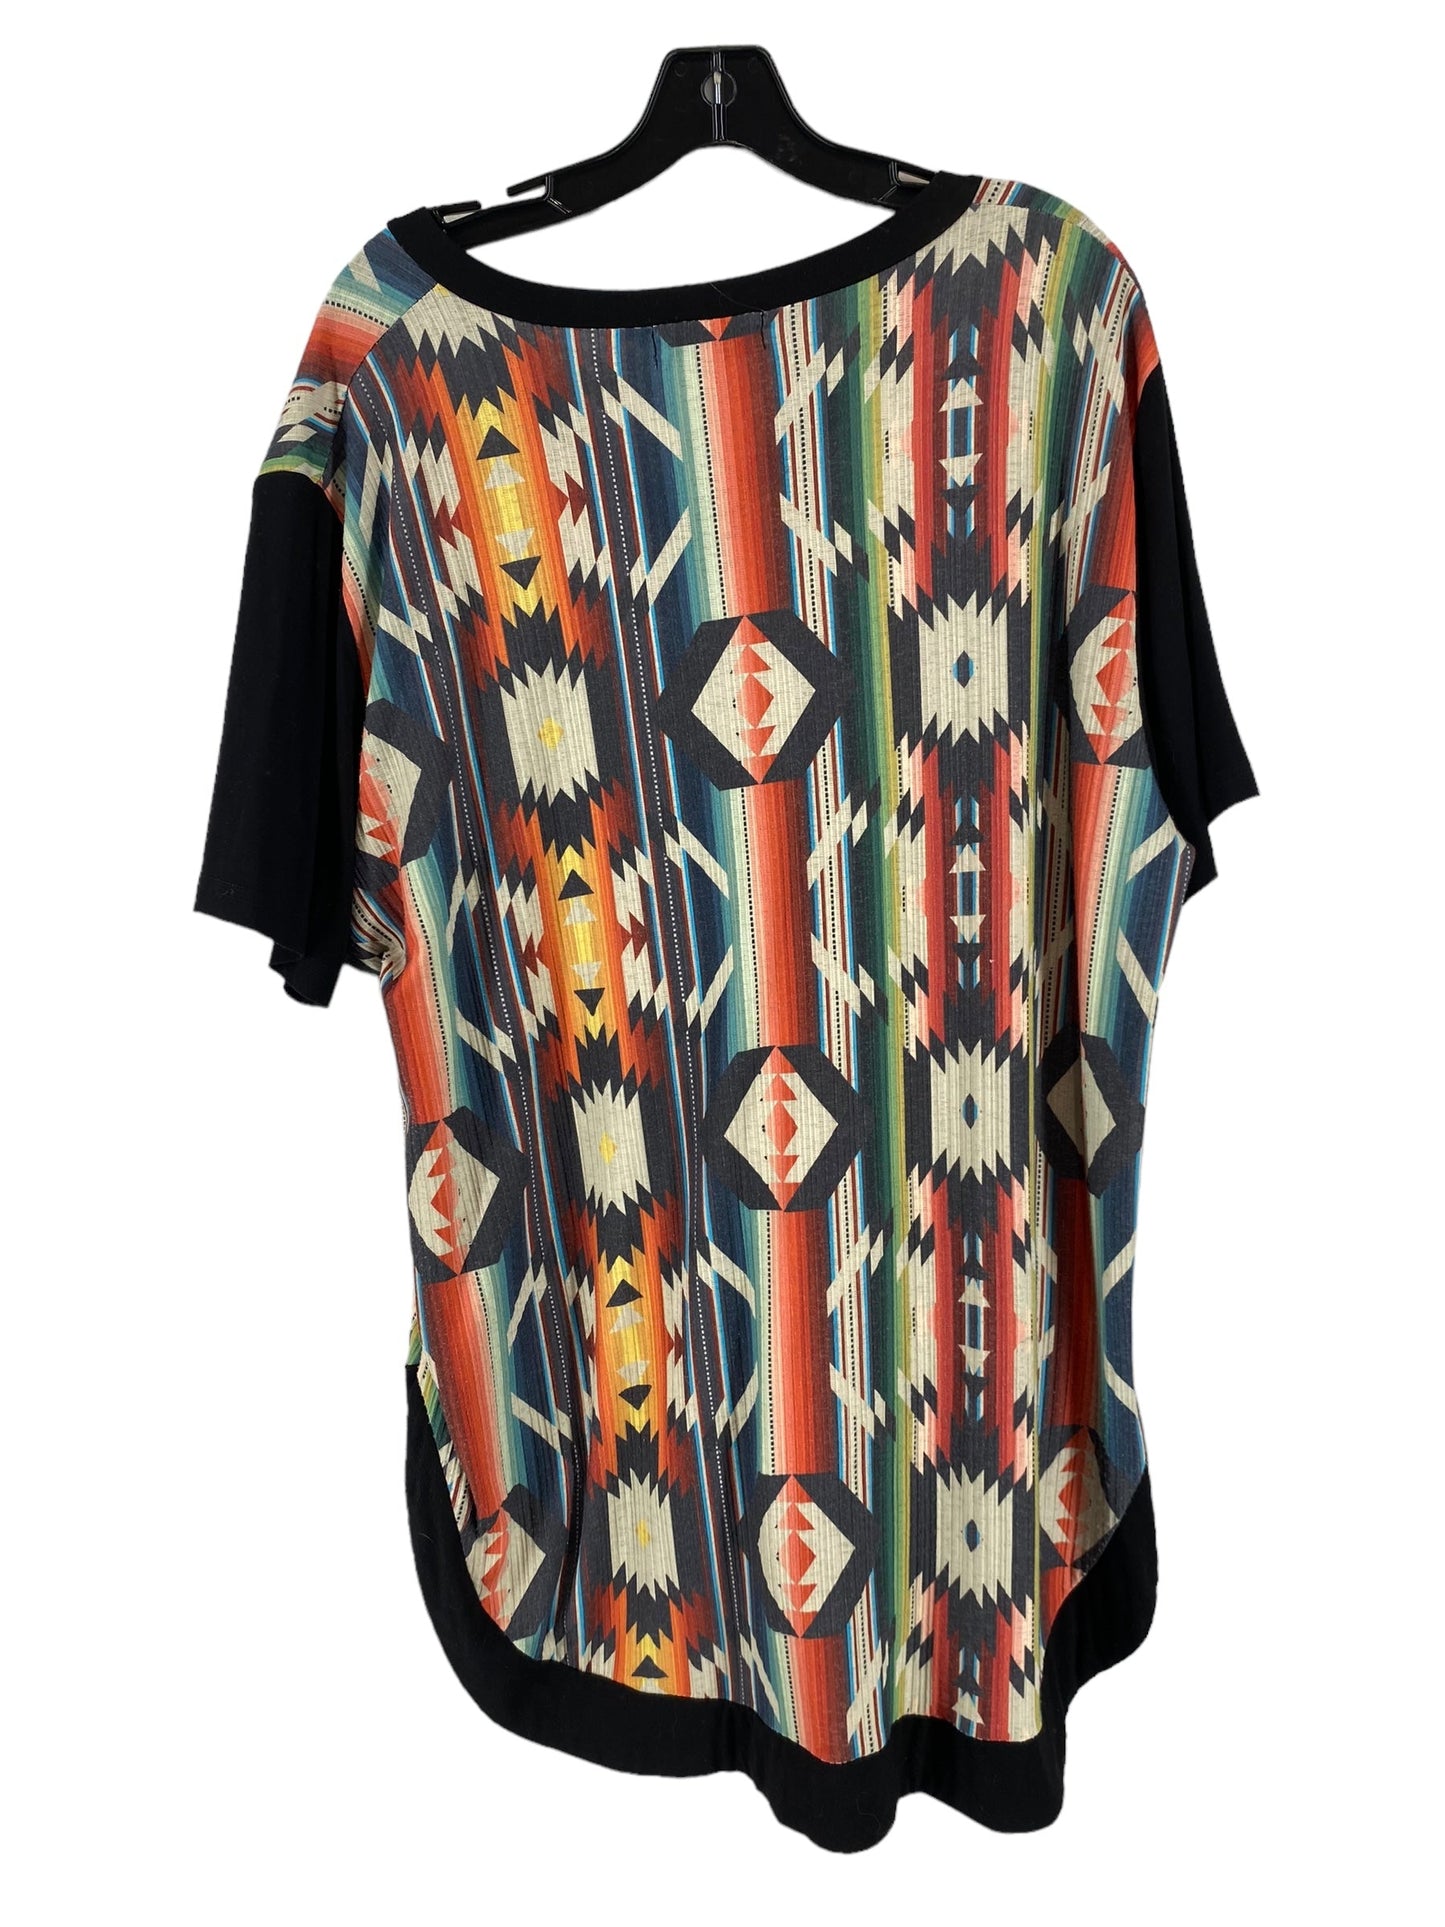 Multi-colored Top Short Sleeve Crazy Train, Size Xxl